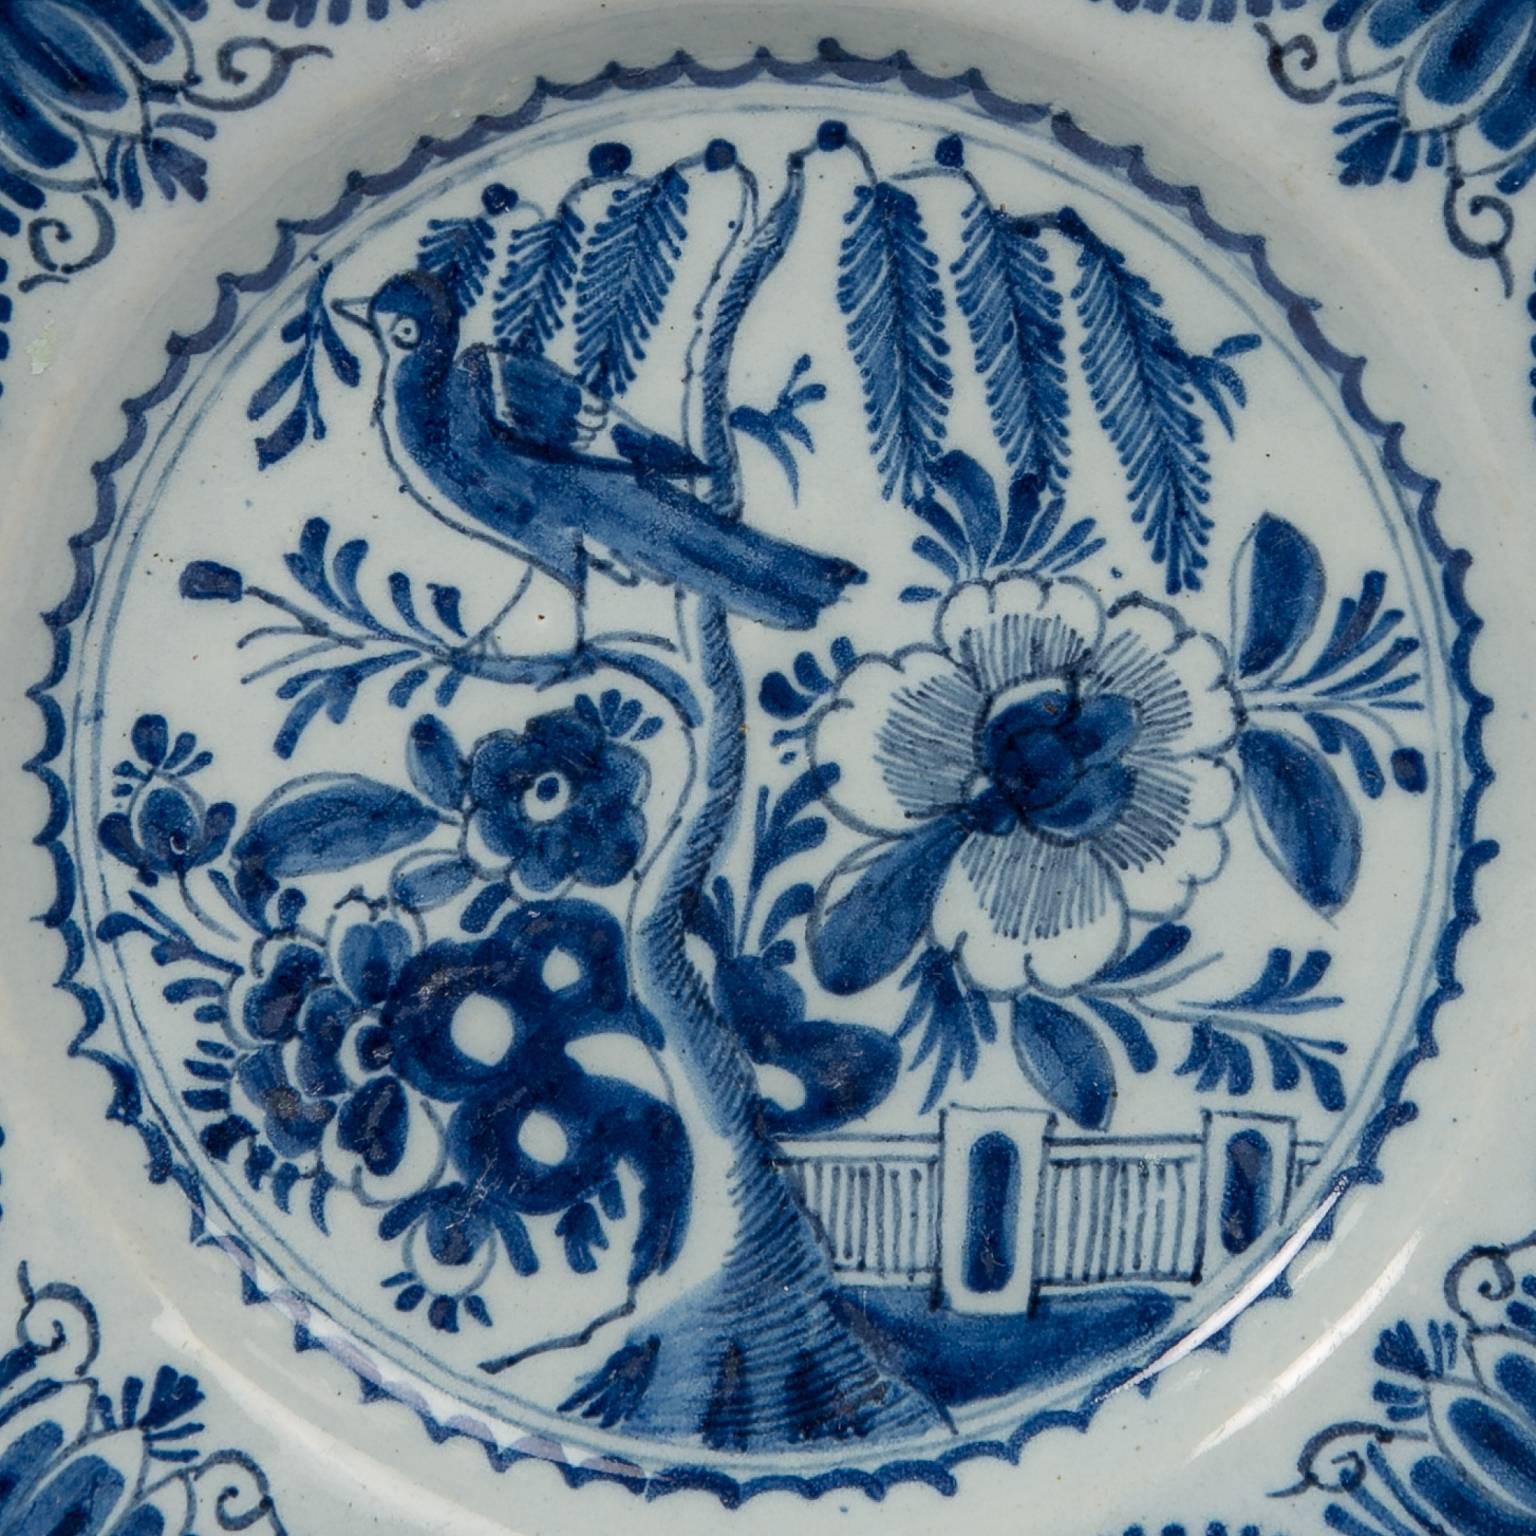 An intricate chinoiserie blue and white Dutch Delft dish painted in cobalt blue showing a garden scene with a long tailed bird perched on a branch of a plum tree, an oversized peony, rockwork, and a garden fence. The lovely design of the bird in the